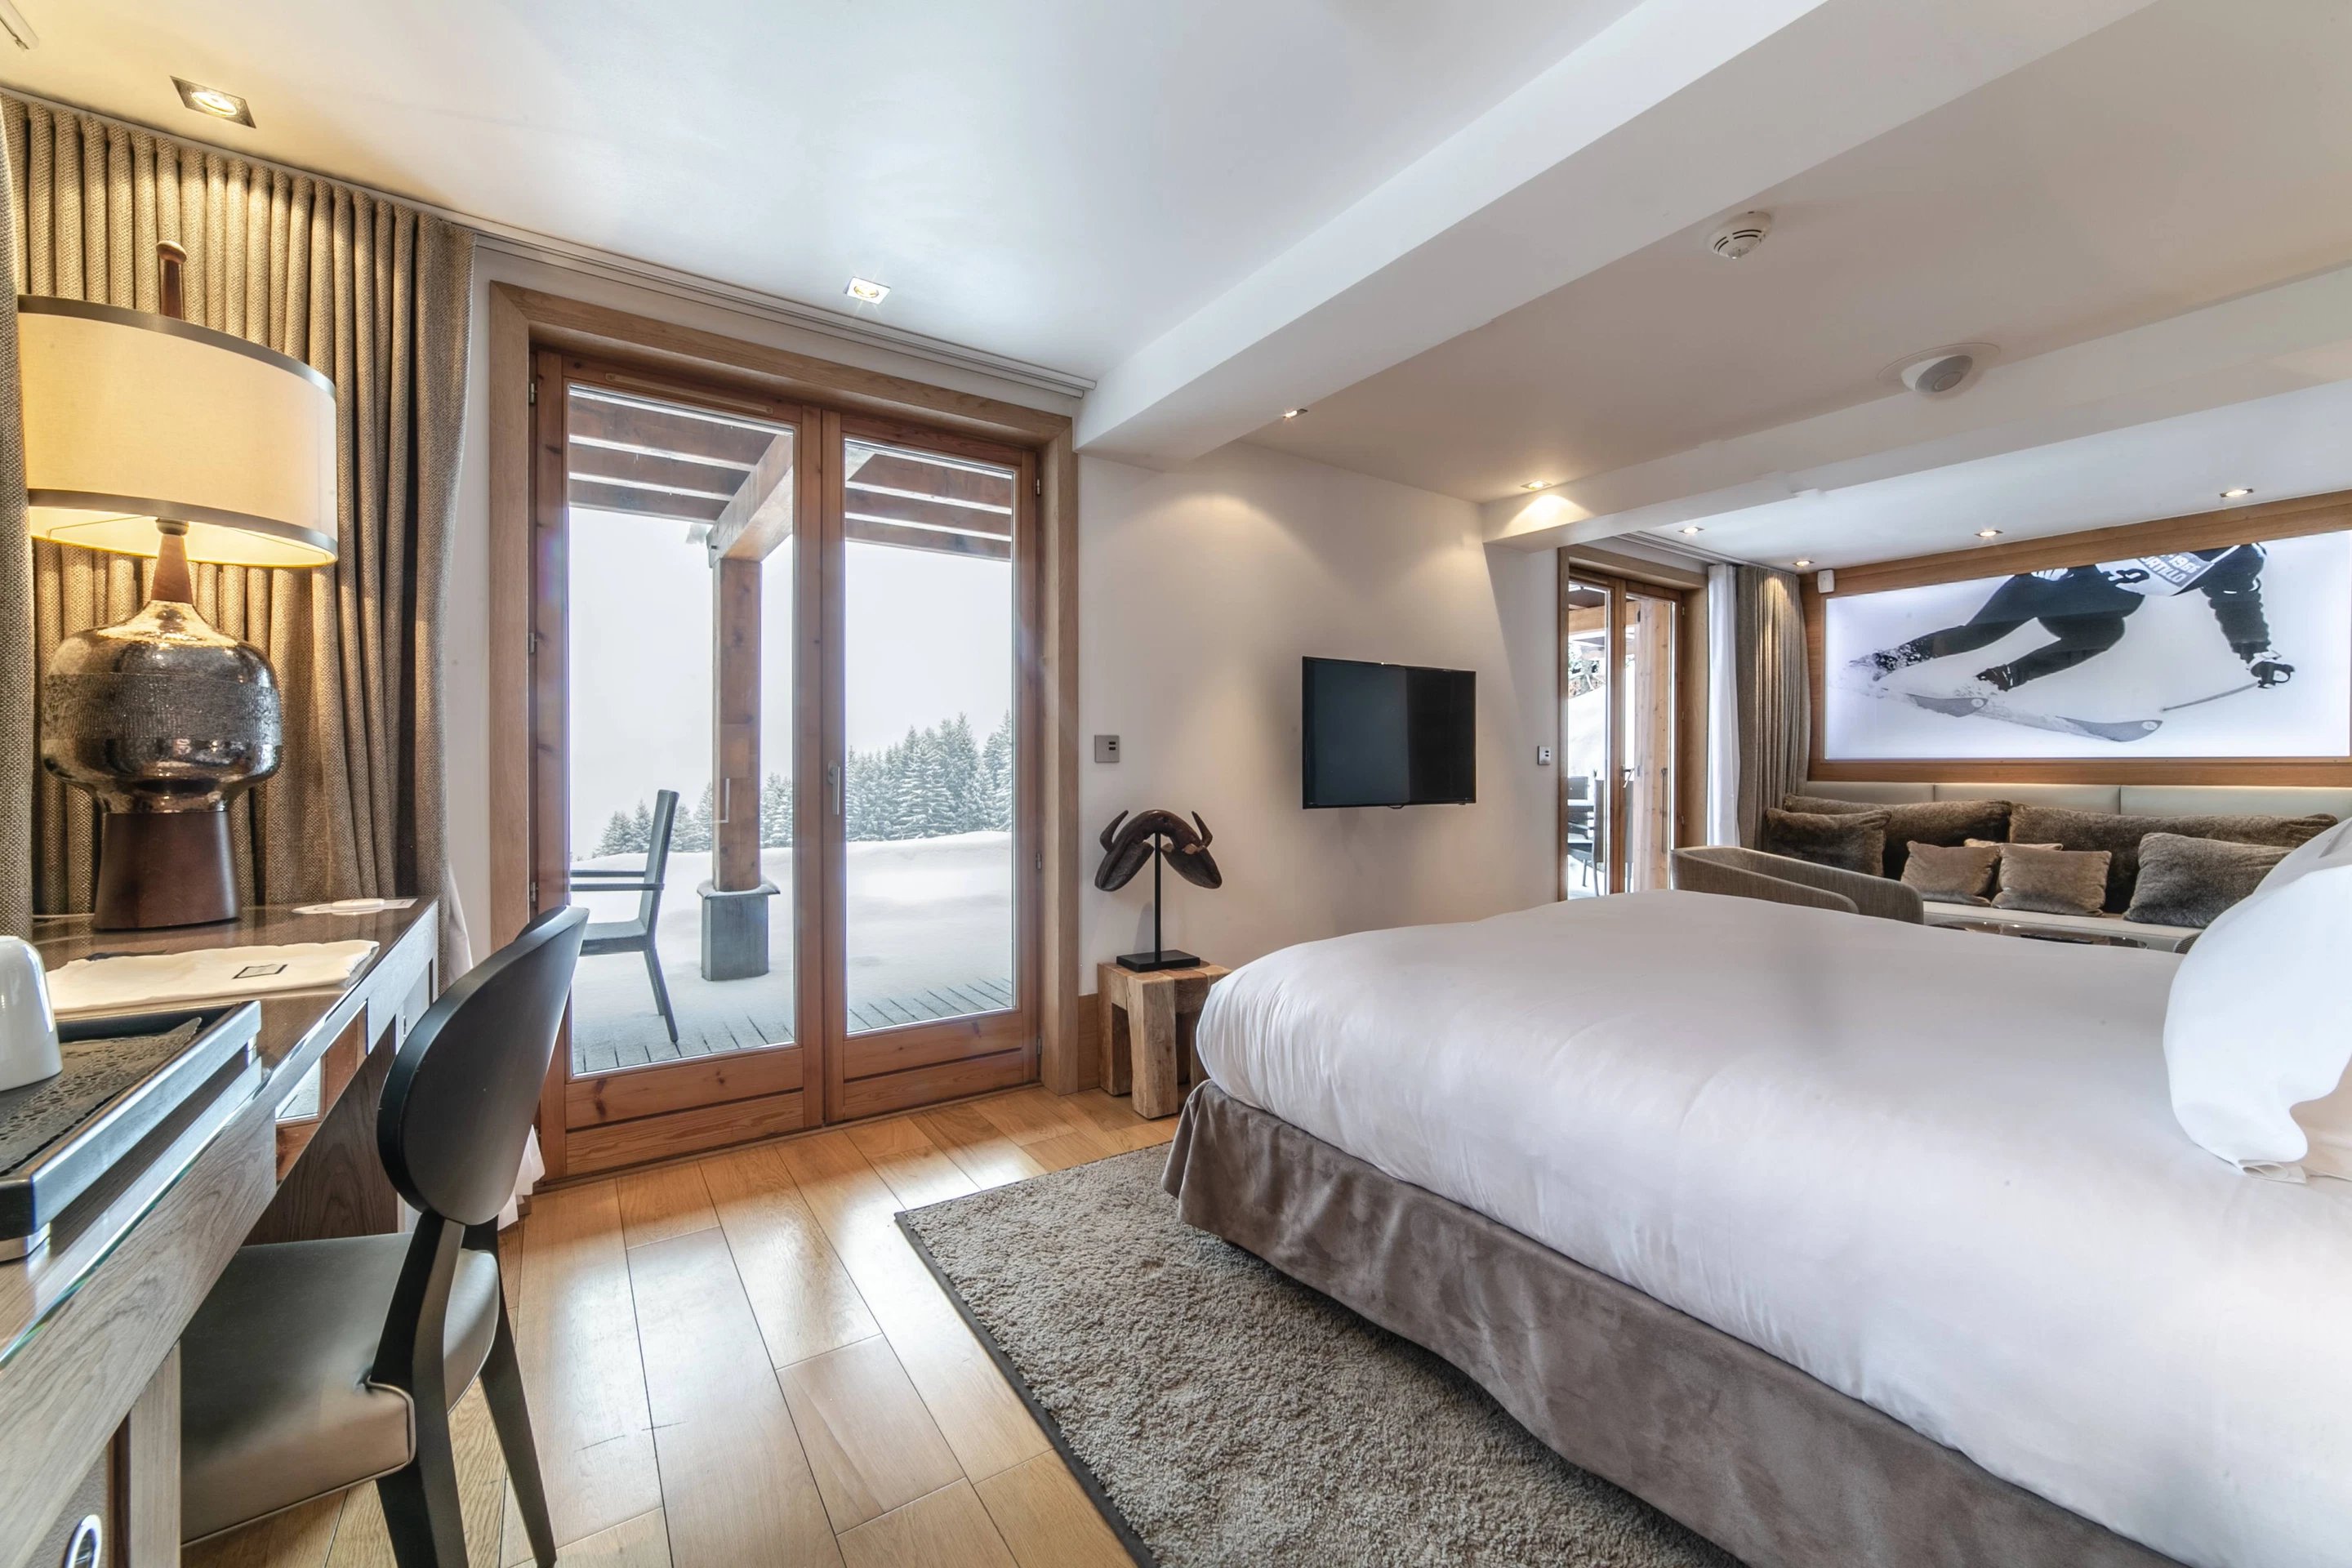 Le Strato - Chalet Timeless - Bedroom